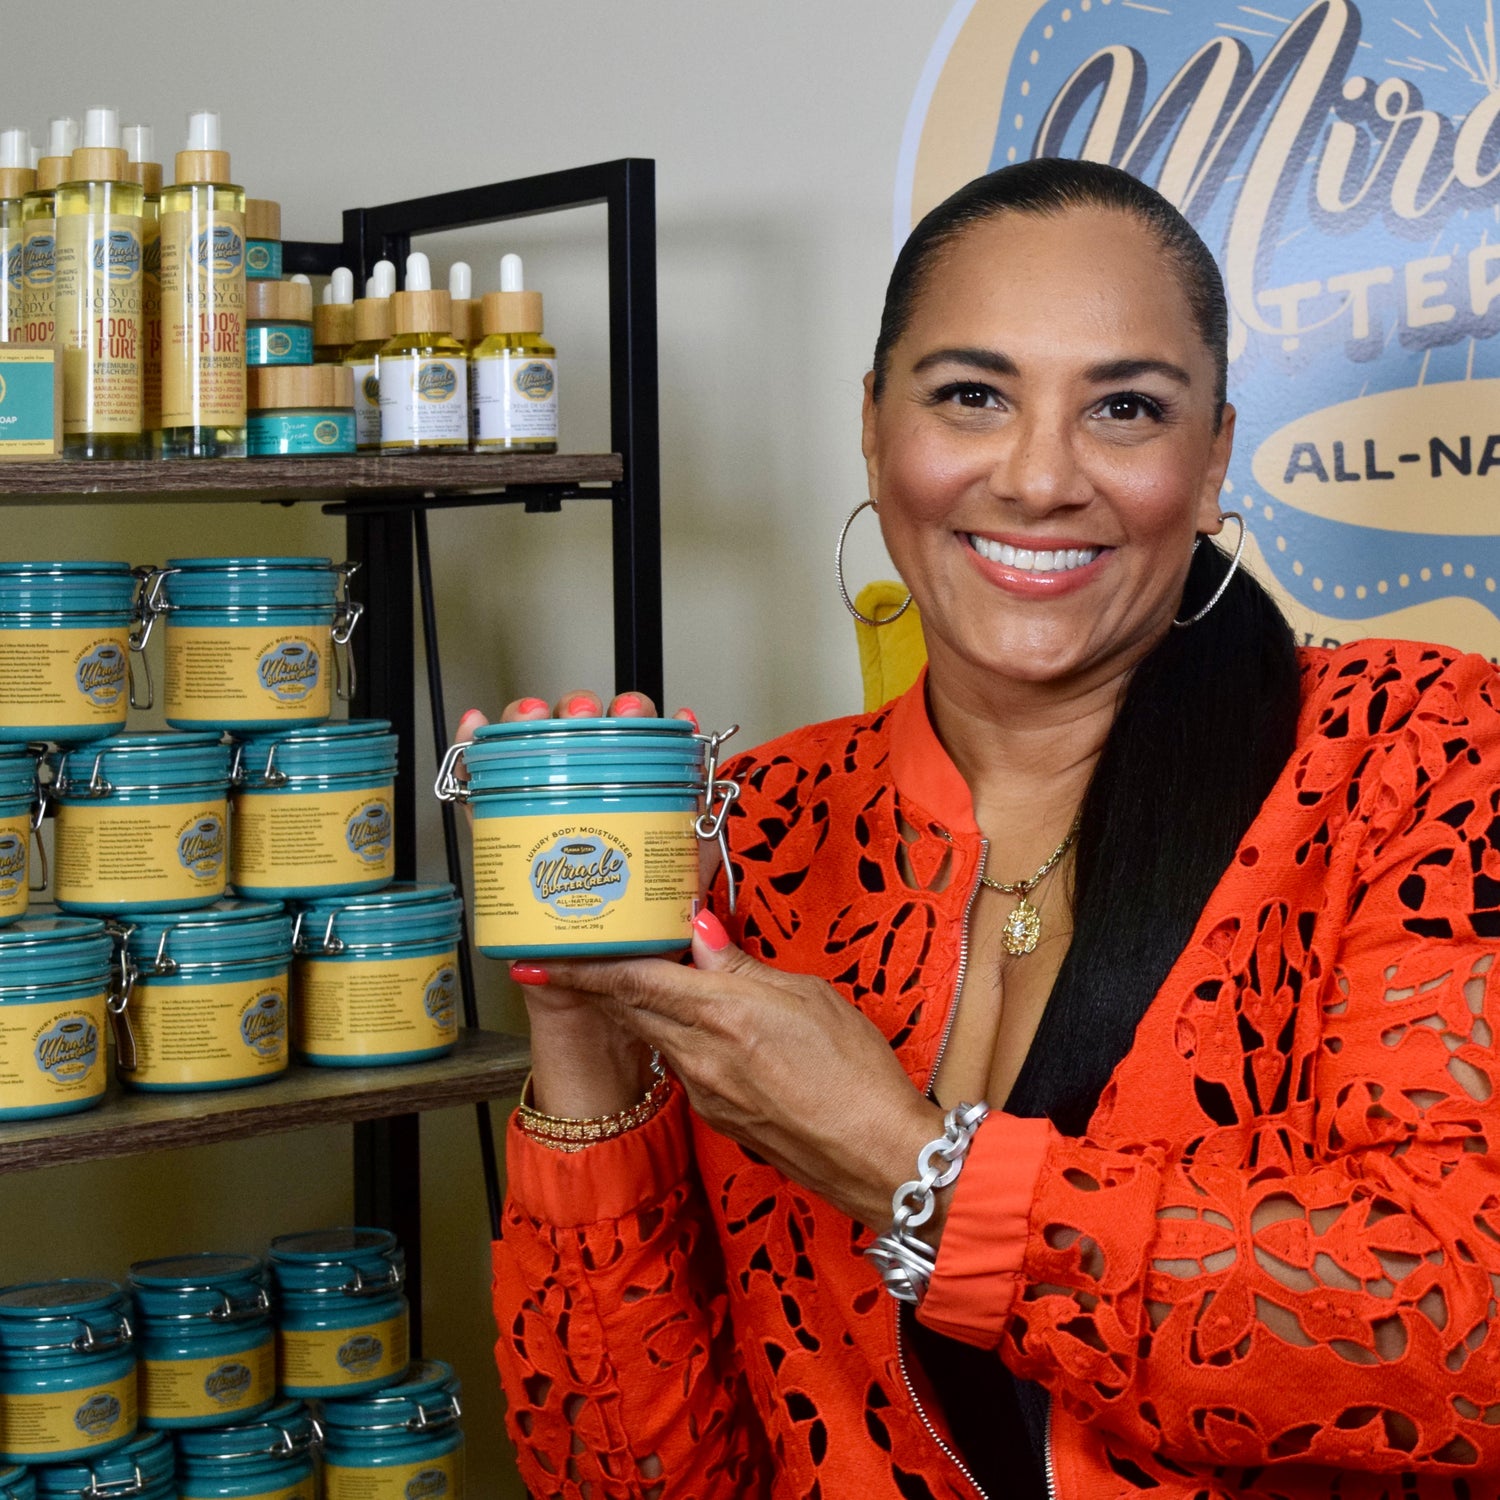 Meet Mama Sita Lewis, owner of Miracle Butter Cream, miraclebuttercream.com